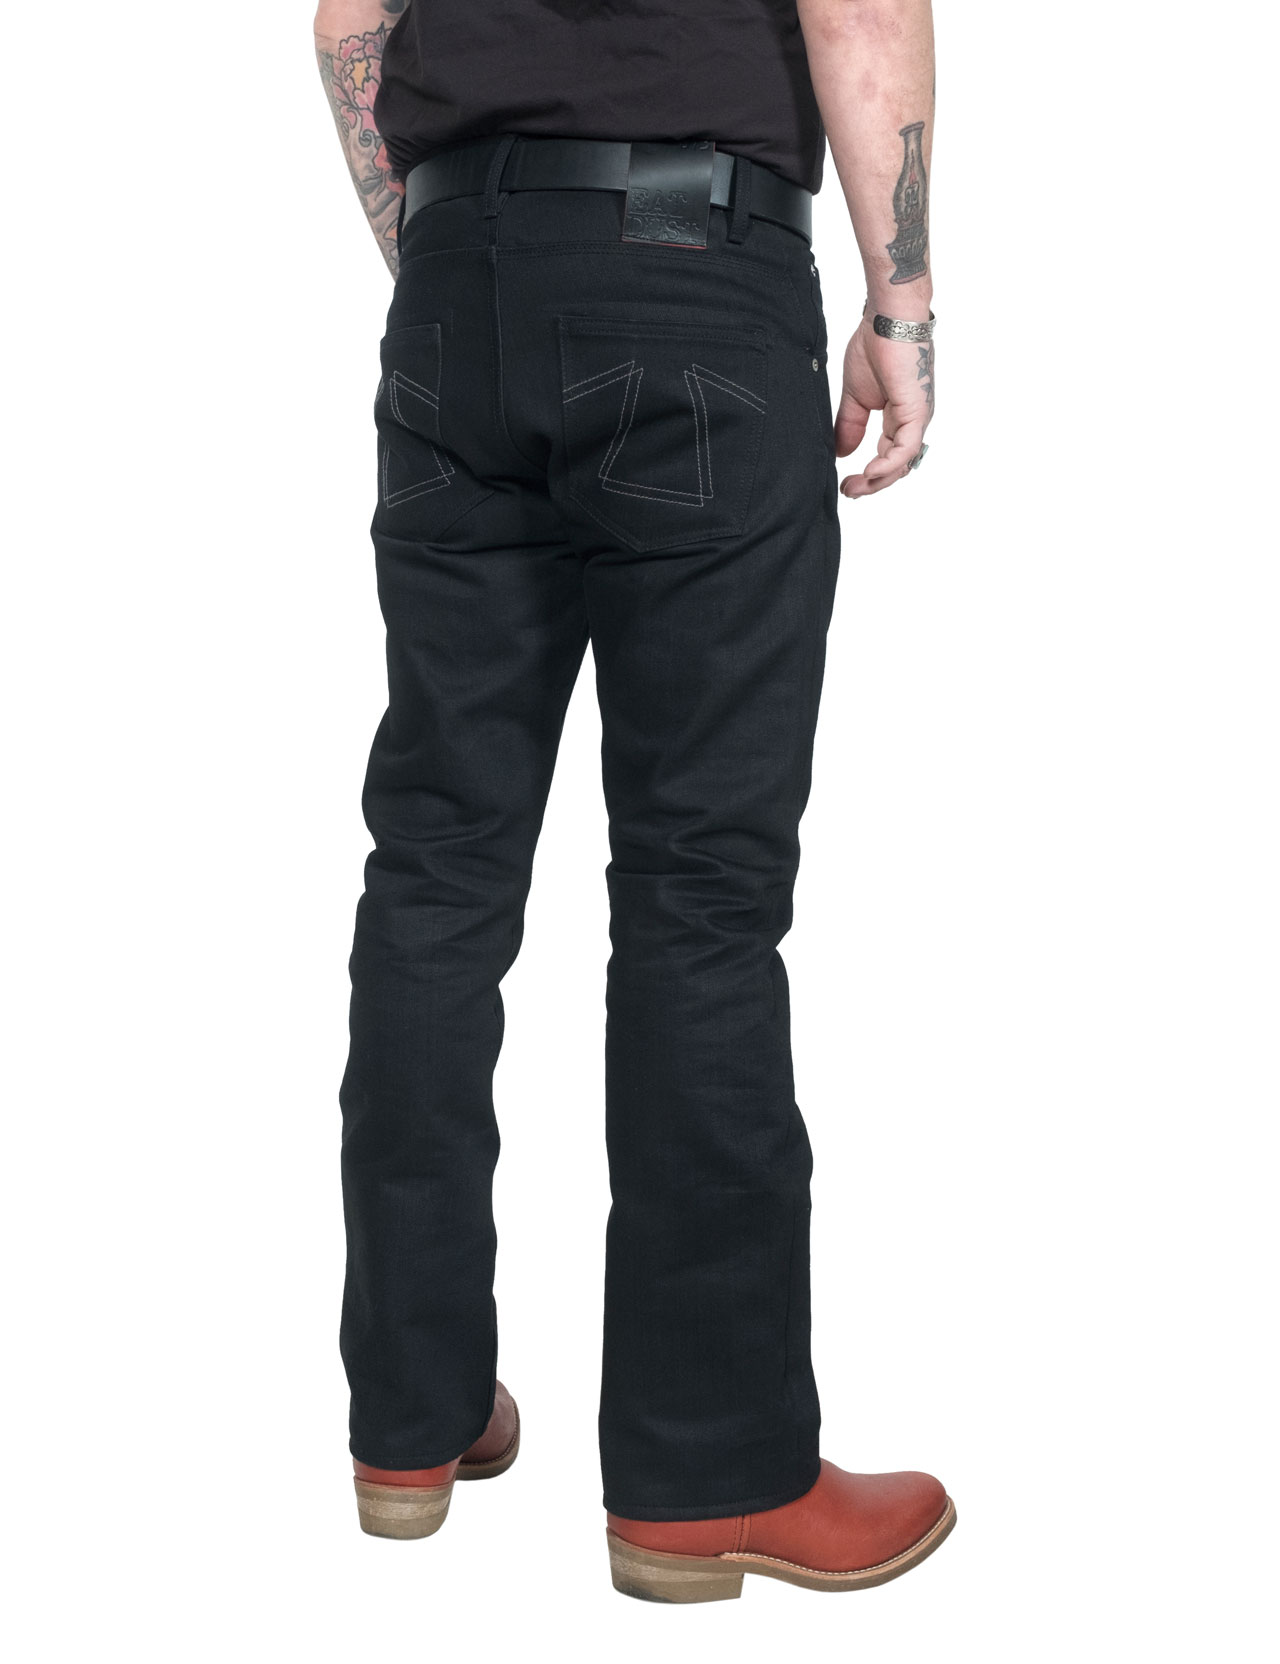 Eat Dust - Fit 63 Bootcut Bloodline Selvage Jeans